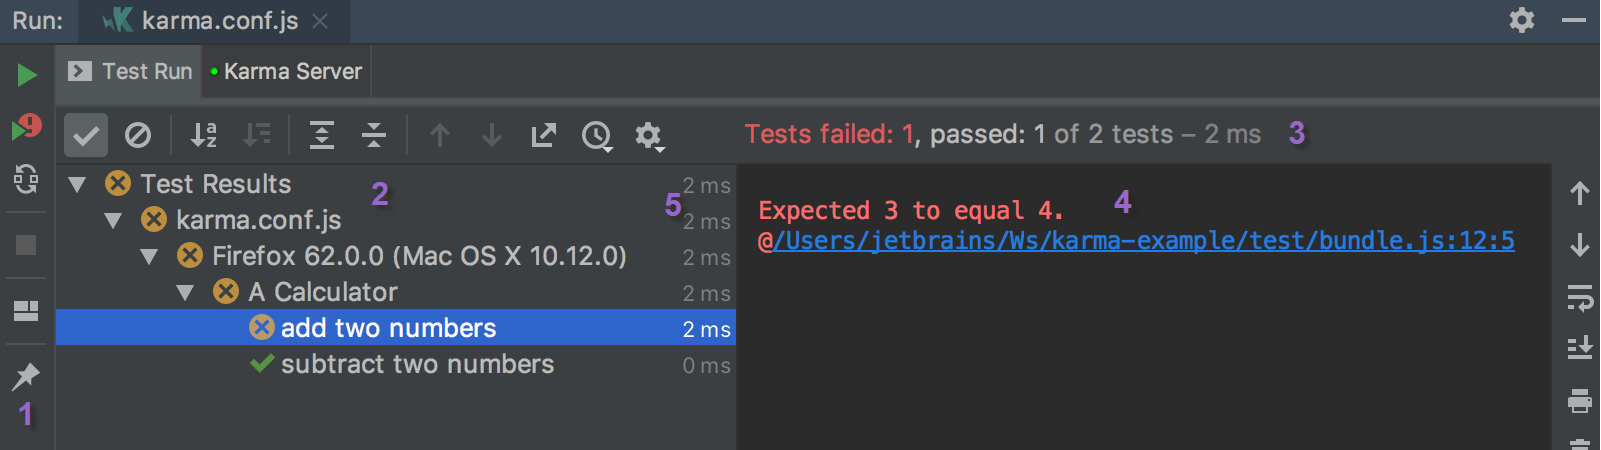 Auto-Run Tests - JetBrains Guide